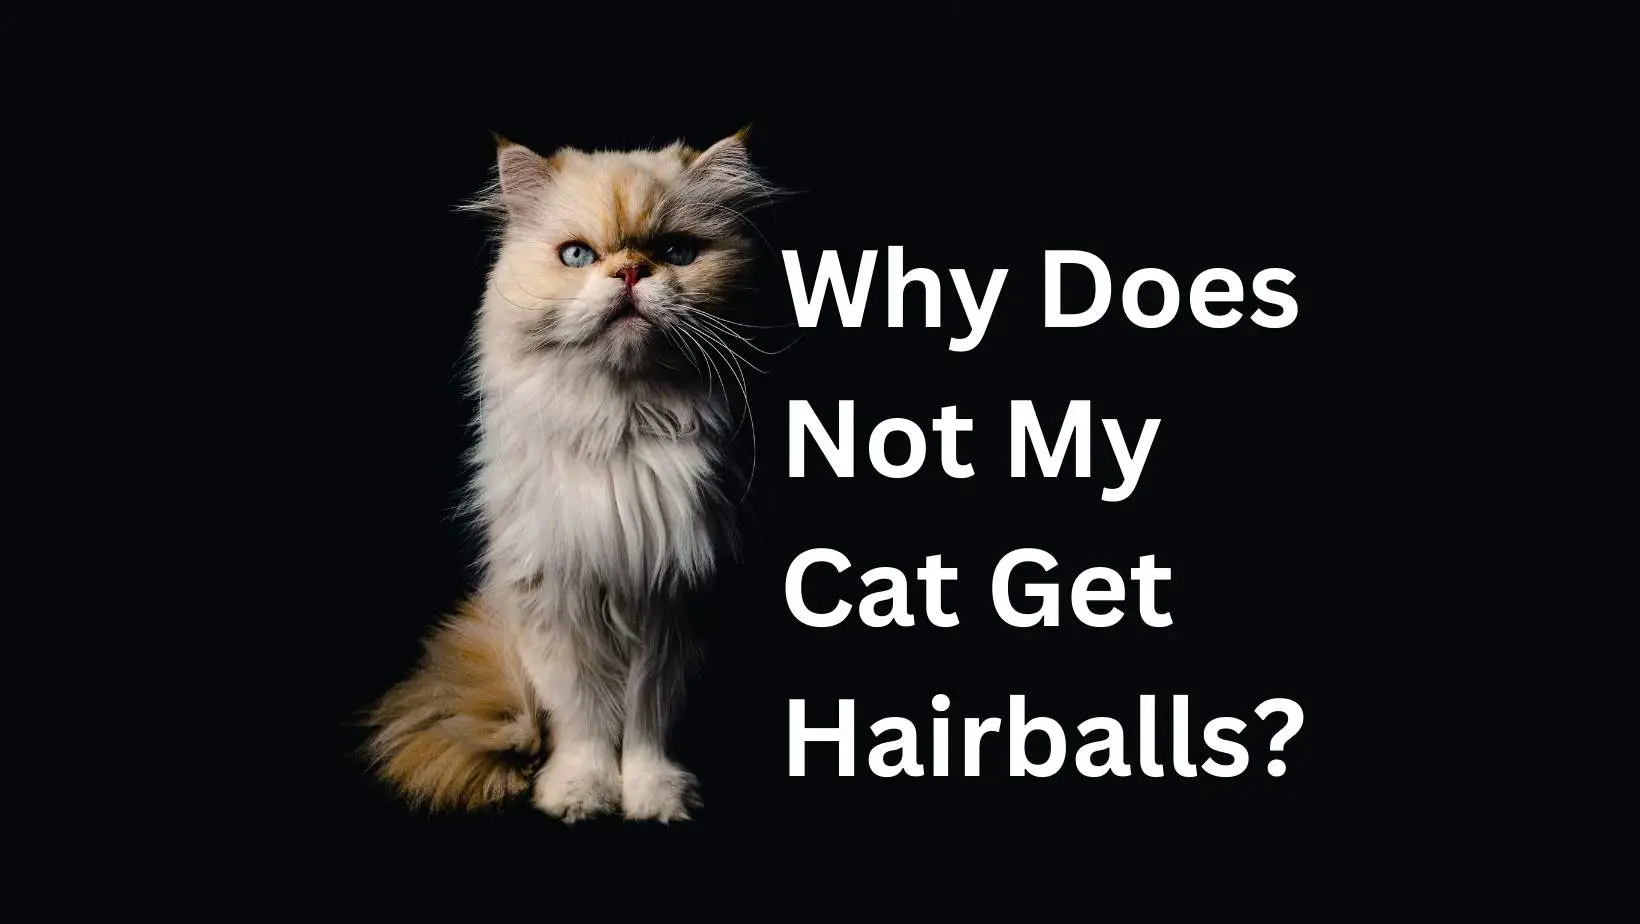 Why Doesn't My Cat Get Hairballs?